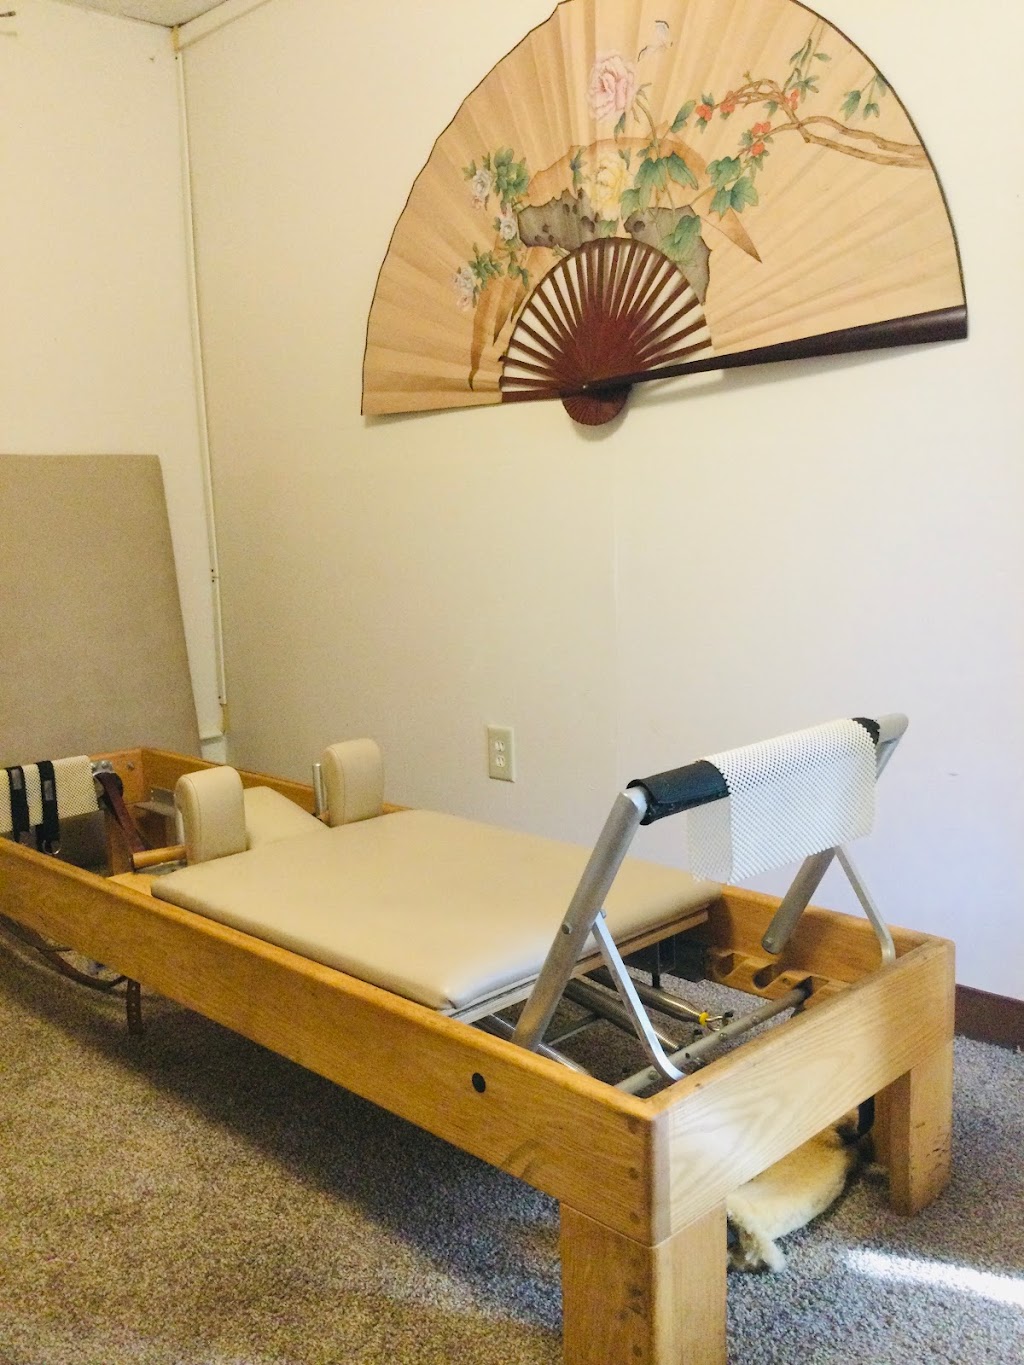 GymWithin - Pilates Studio and Massage therapy | 875 Co Rd 38, Arkville, NY 12406 | Phone: (646) 298-5818